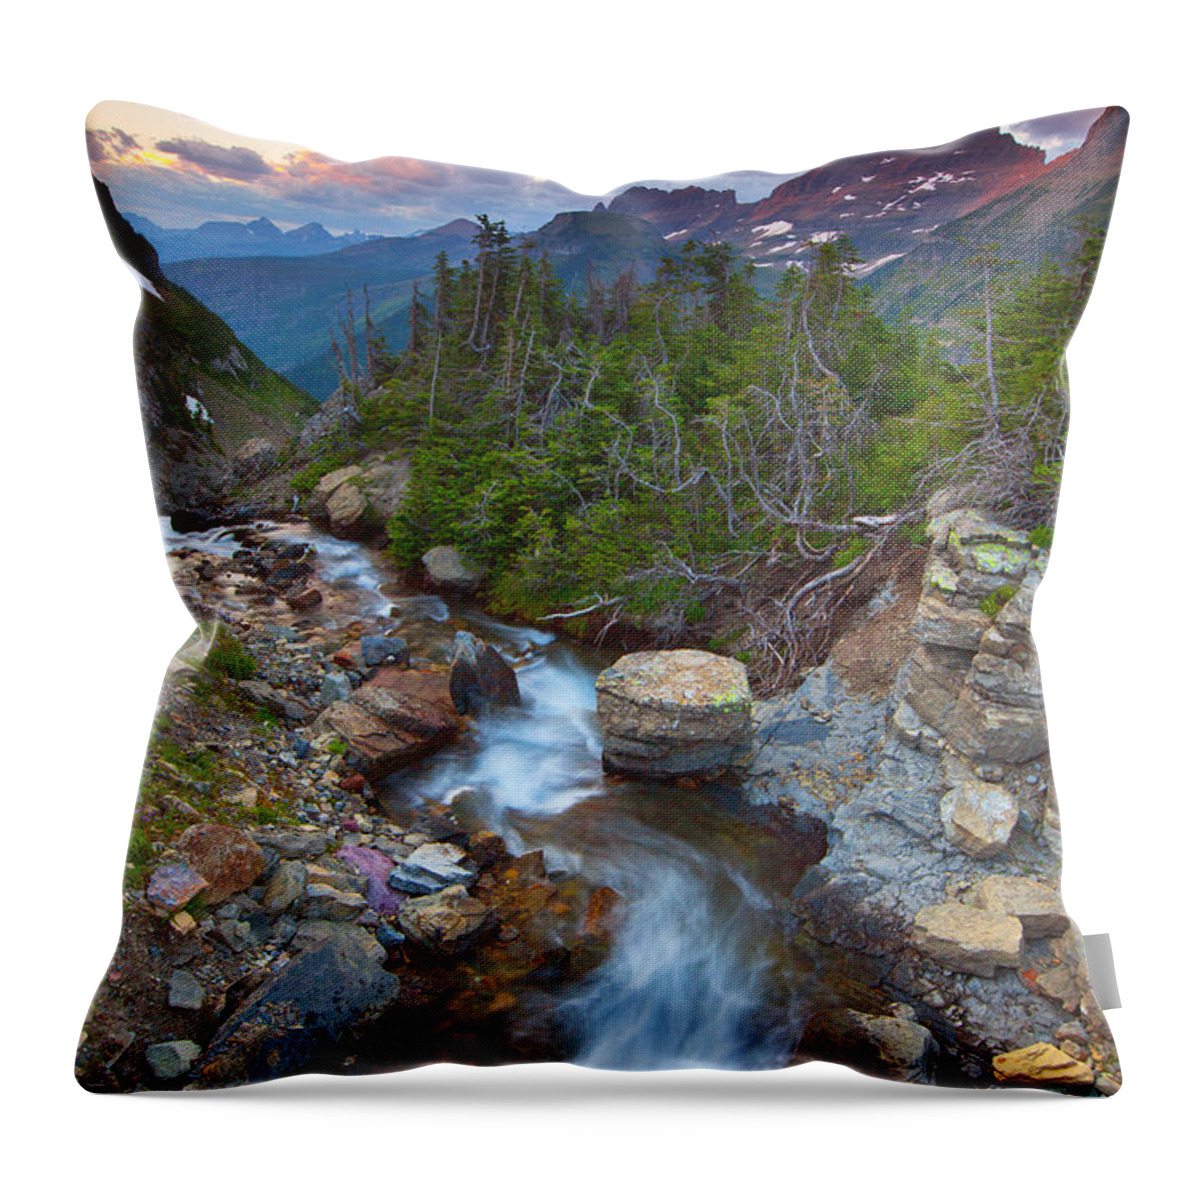 Sunset Throw Pillow featuring the photograph Glaciers Wild by Darren White